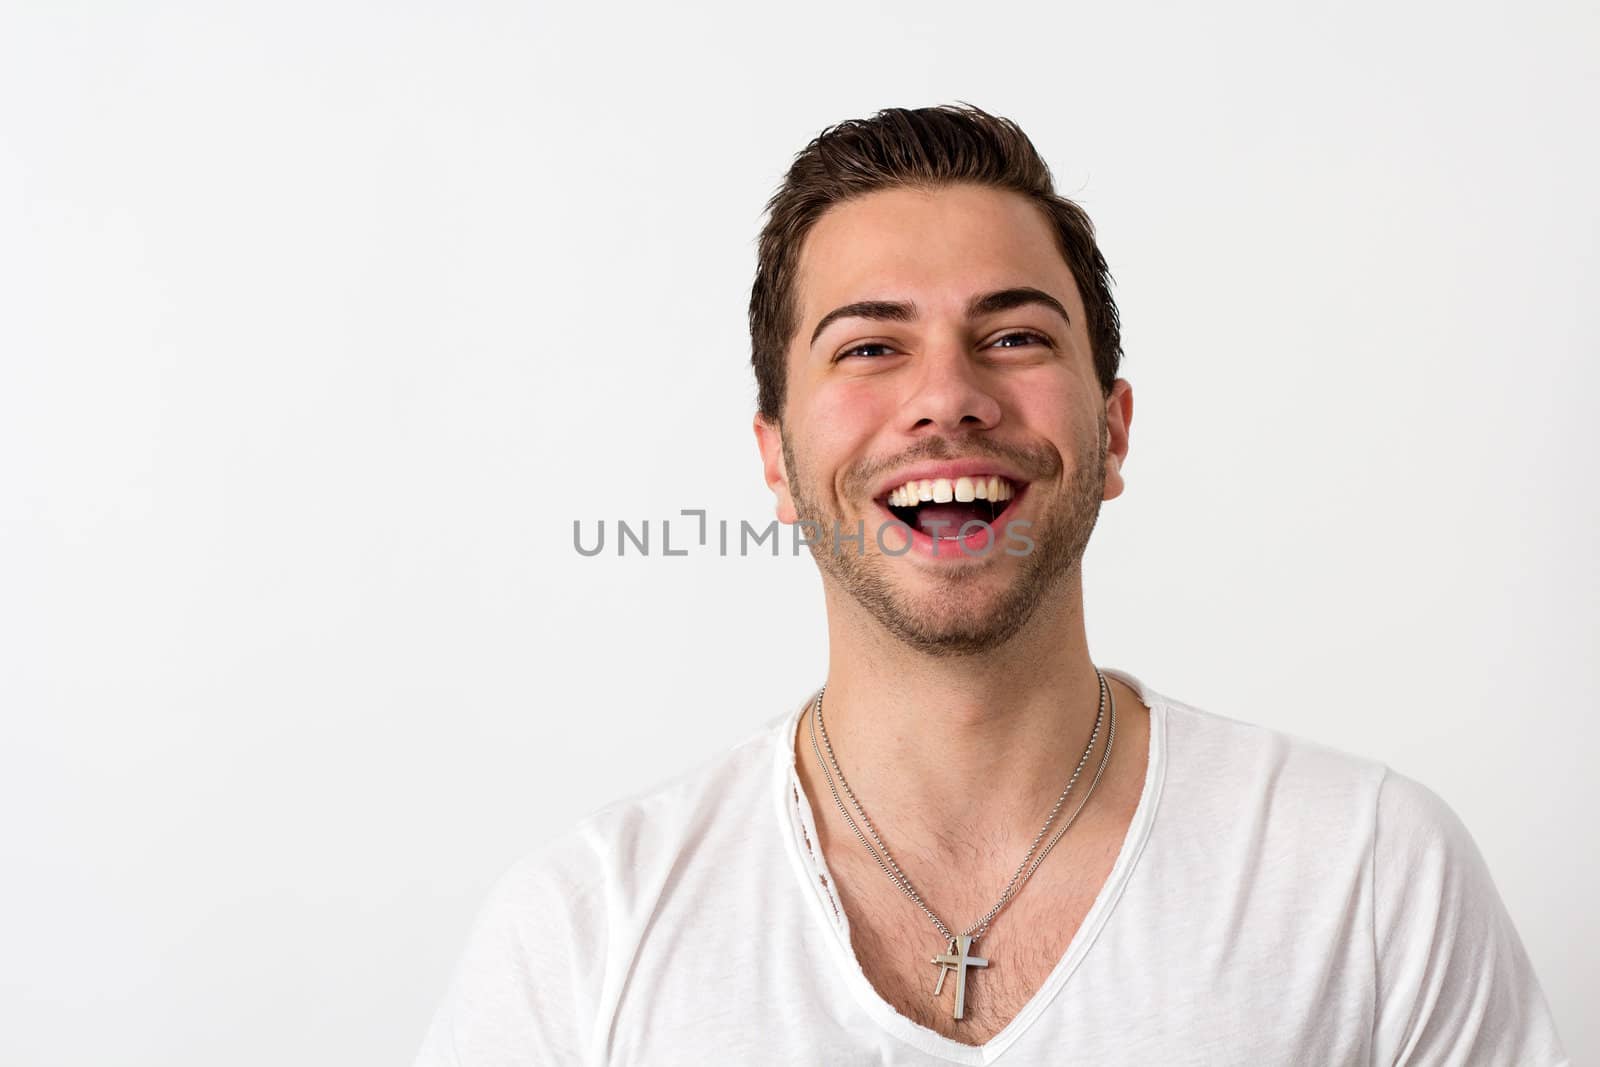 Portrait of a Young Attractive brunette Likeable Man